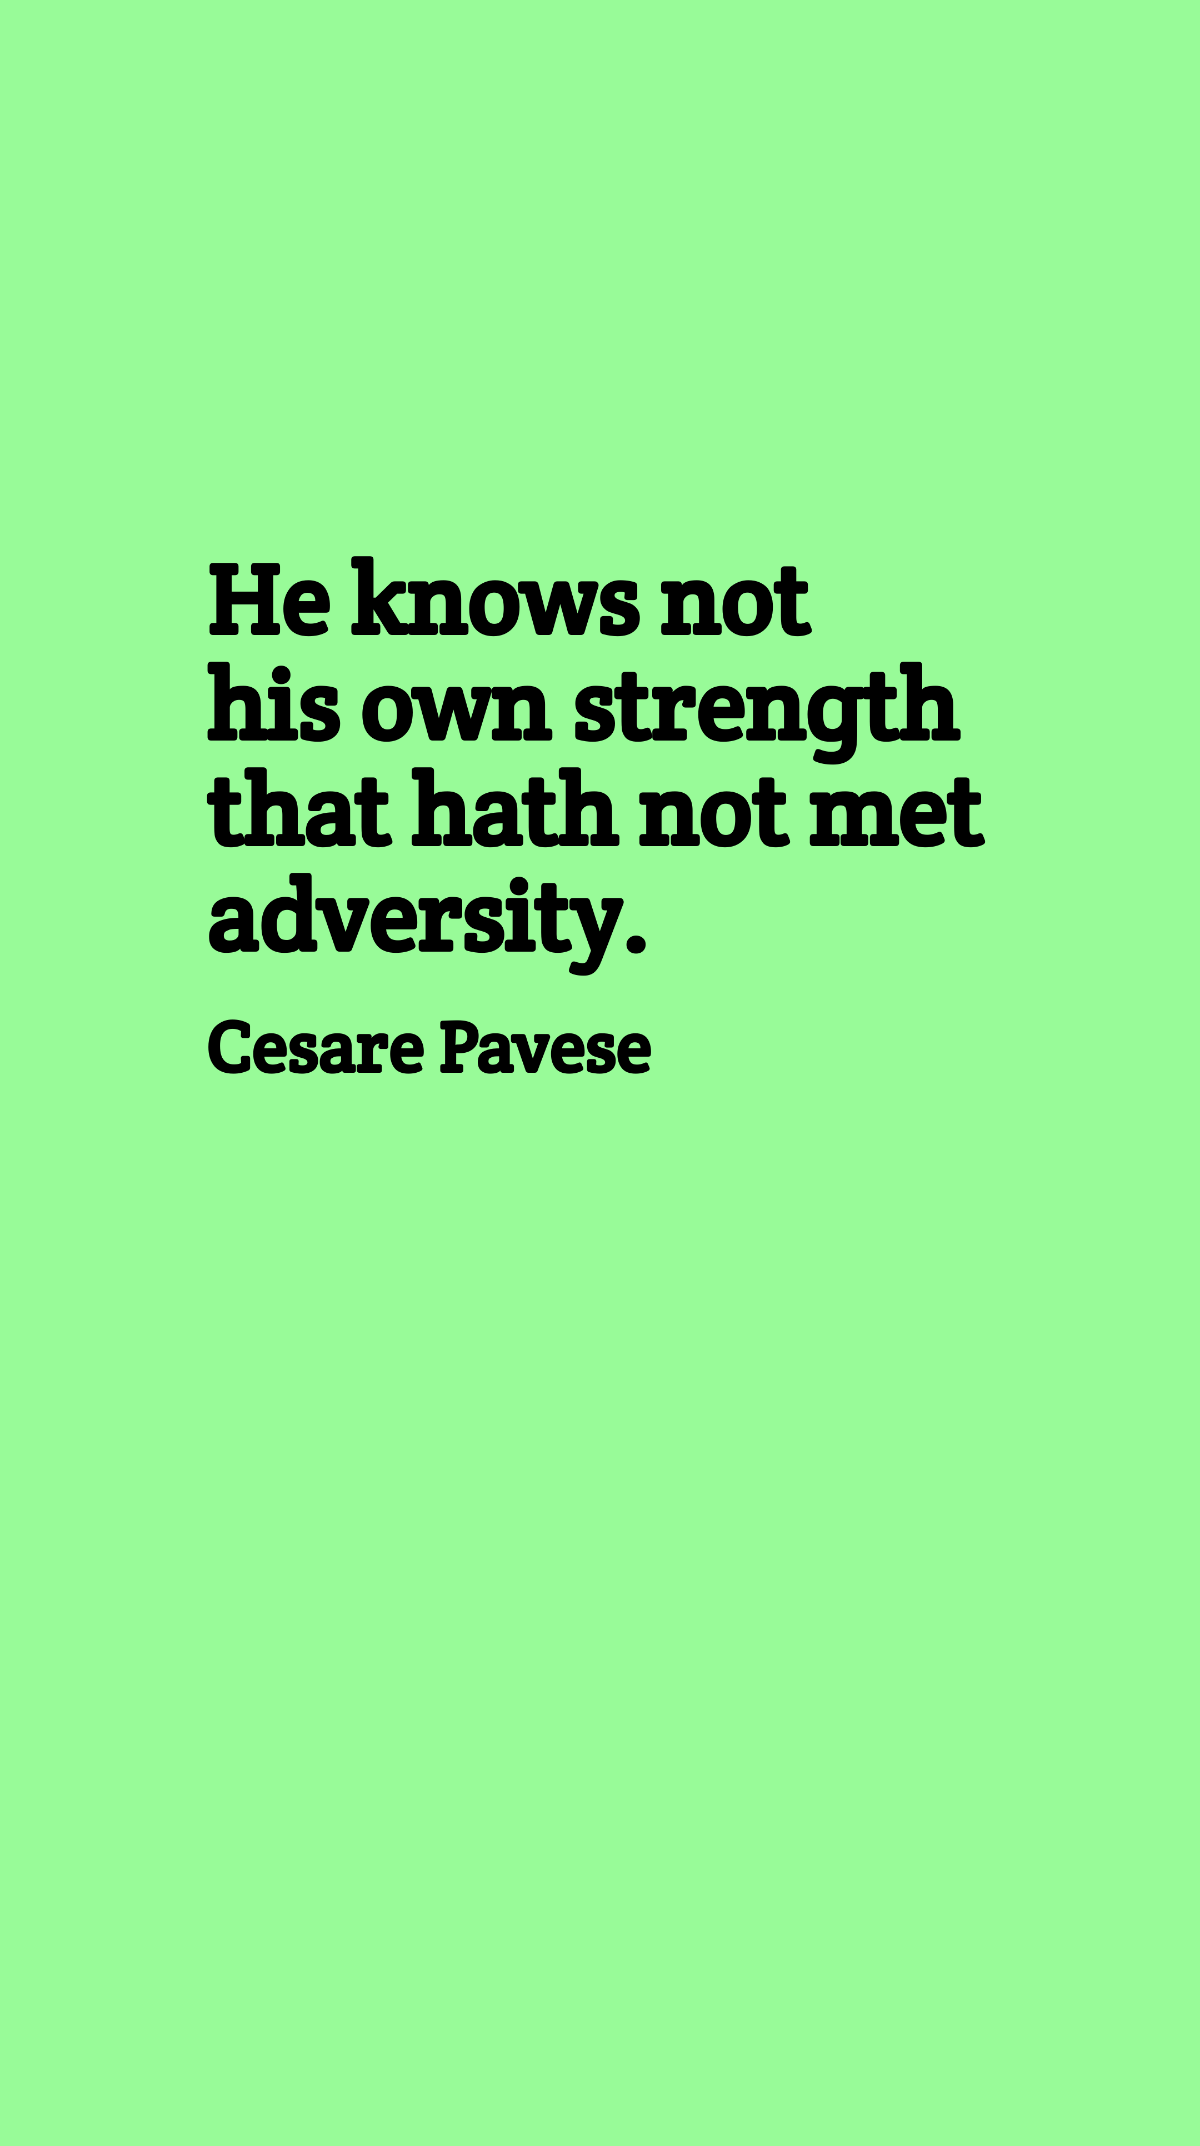 Cesare Pavese - He knows not his own strength that hath not met adversity. Template